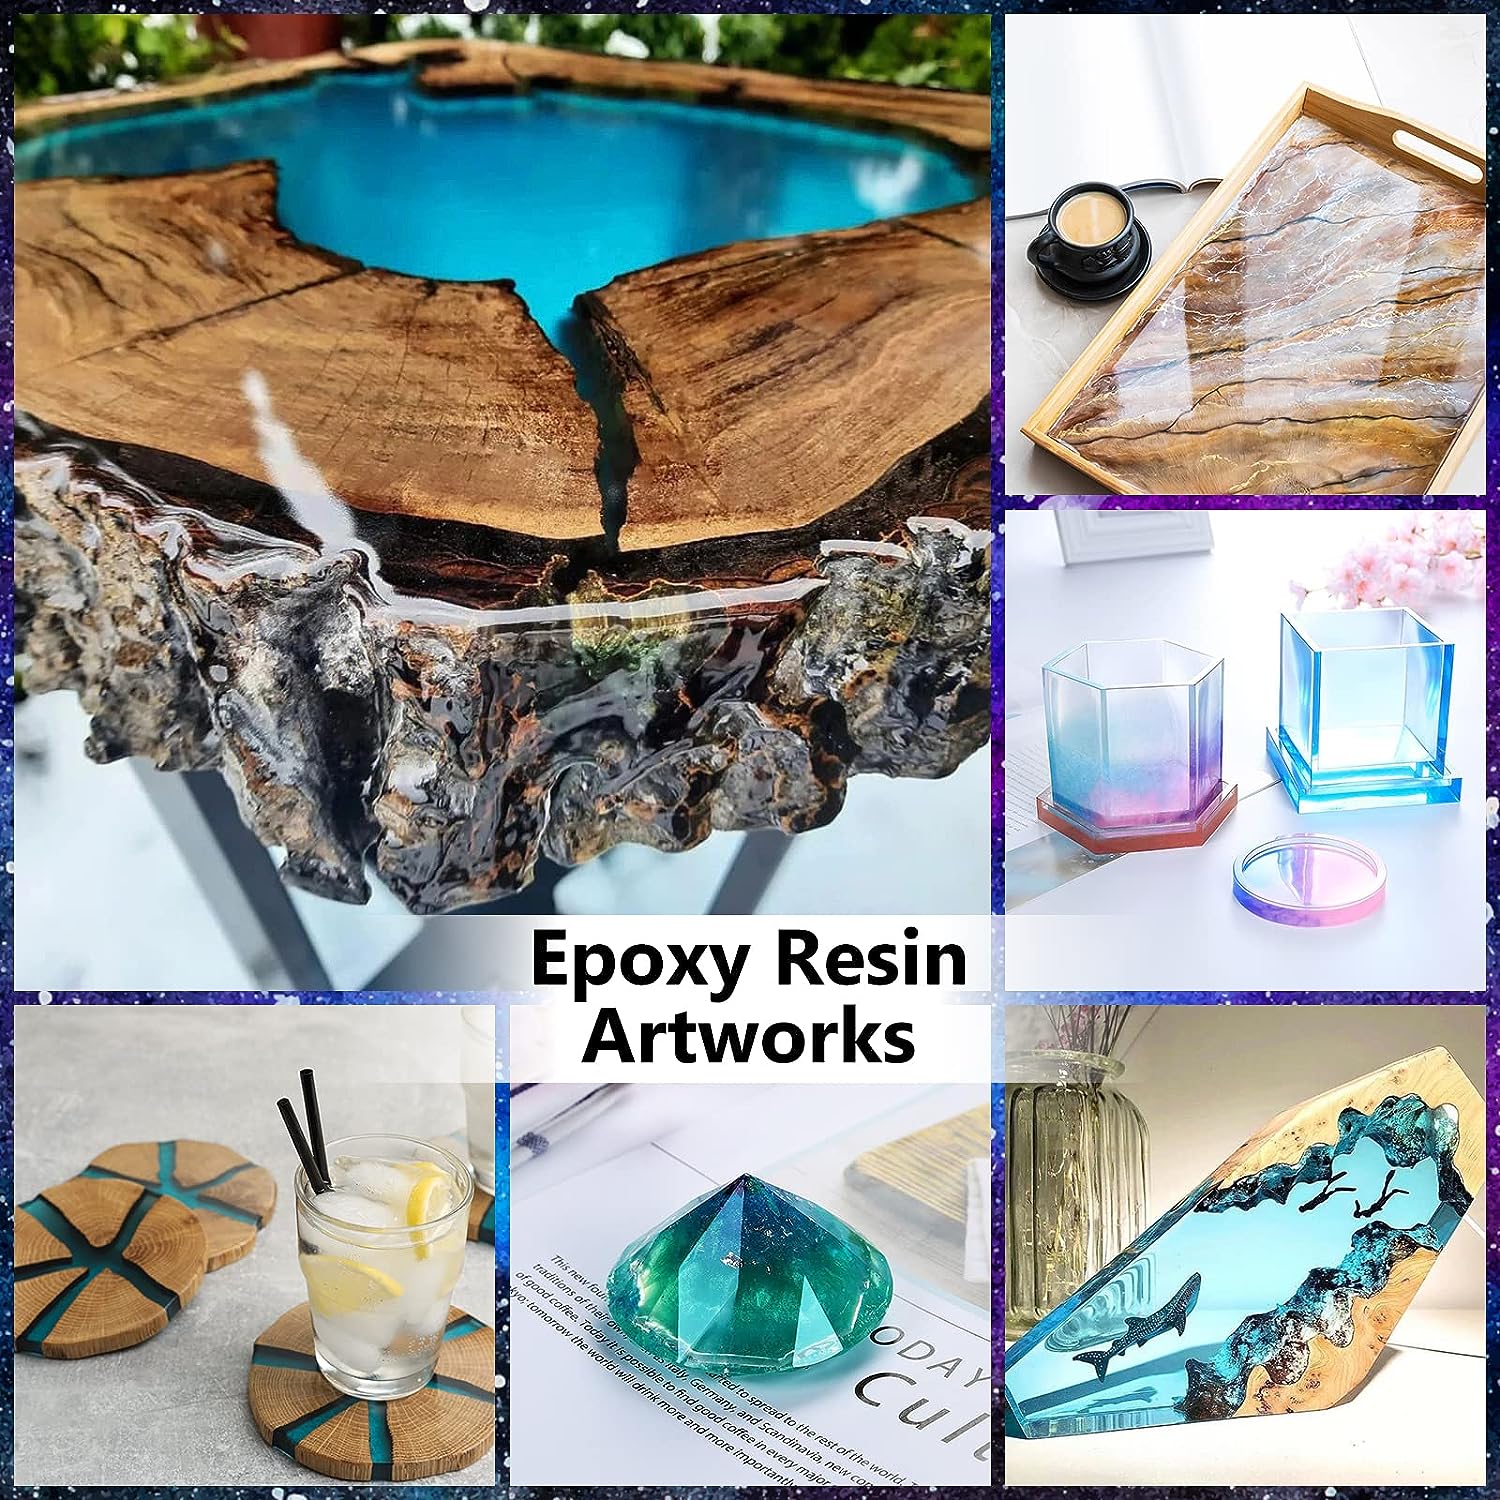 KISREL Epoxy Resin 2Gallon - Crystal Clear Epoxy Resin Kit - No Yellowing  No Bubble Art Resin Casting Resin for Art Crafts, Jewelry Making, Wood &  Resin Molds(1 Gallon x 2)